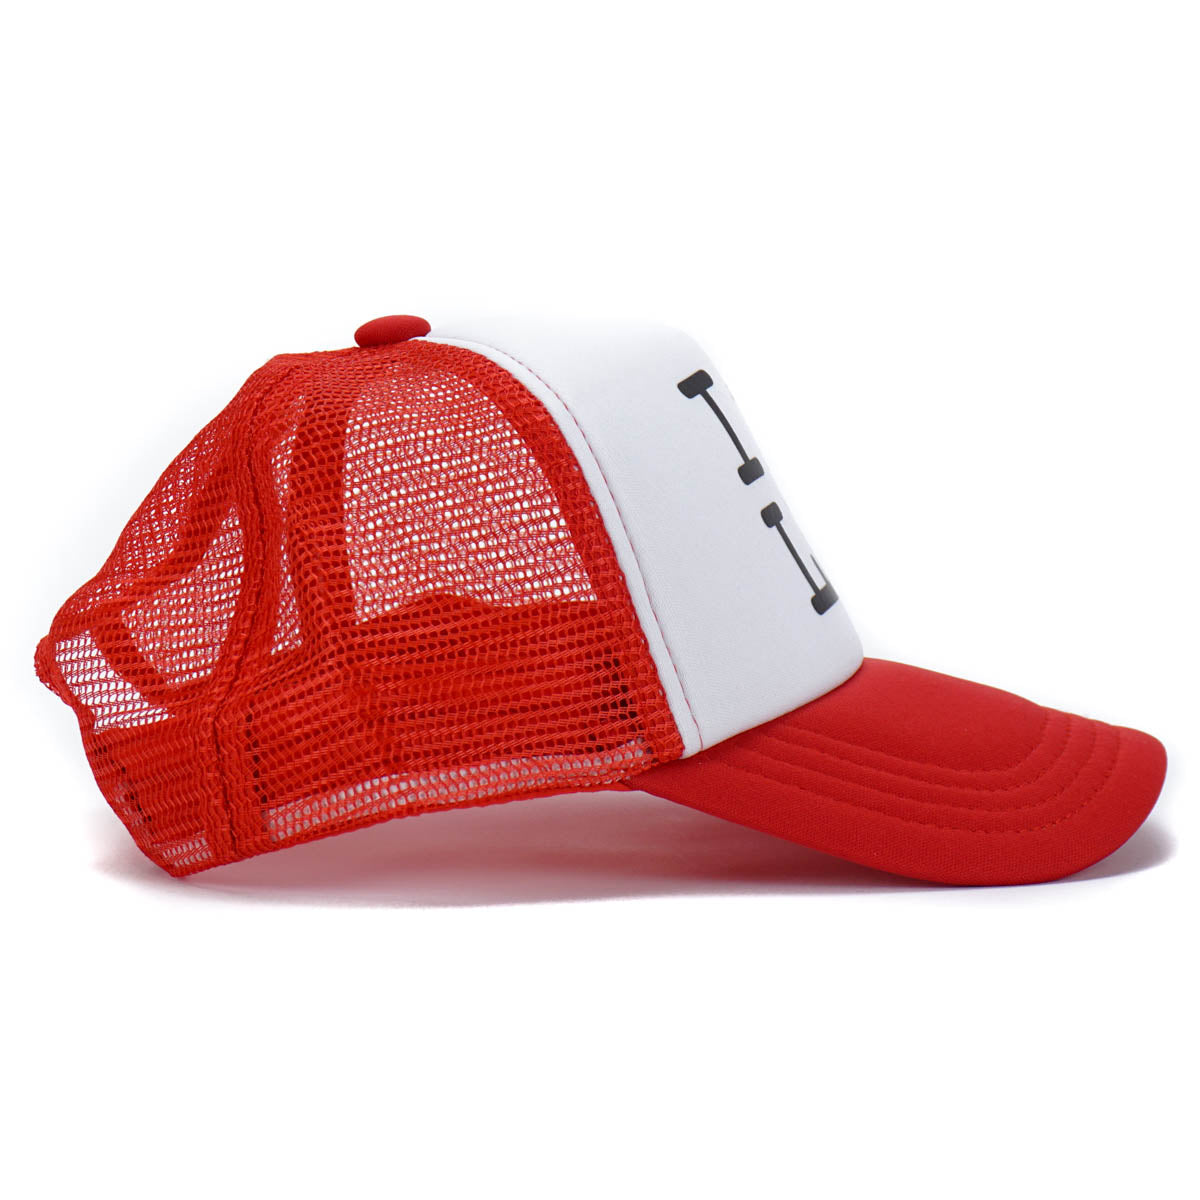 product image I SKATE LA Youth Hat - Red / White